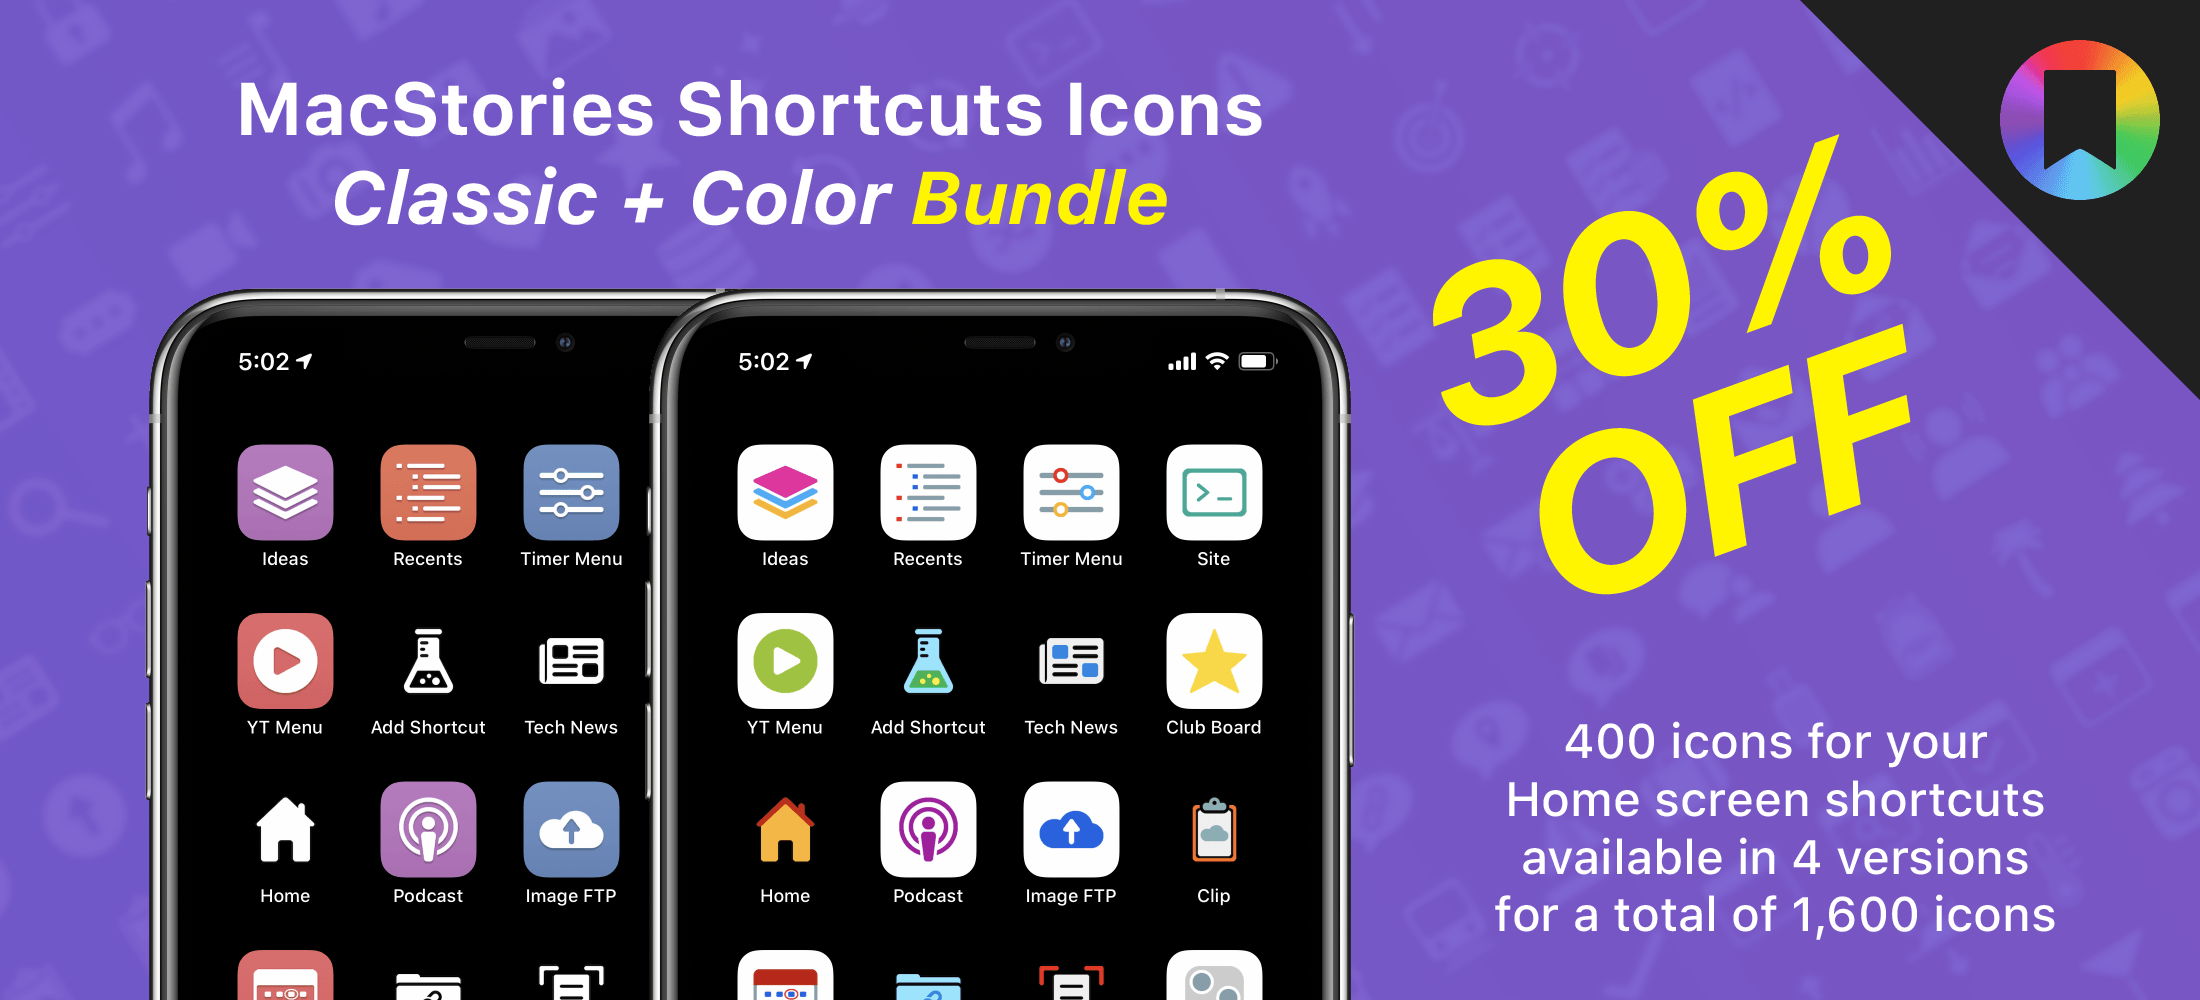 The Shortcuts Icons Bundle edition is now available at 30% off.